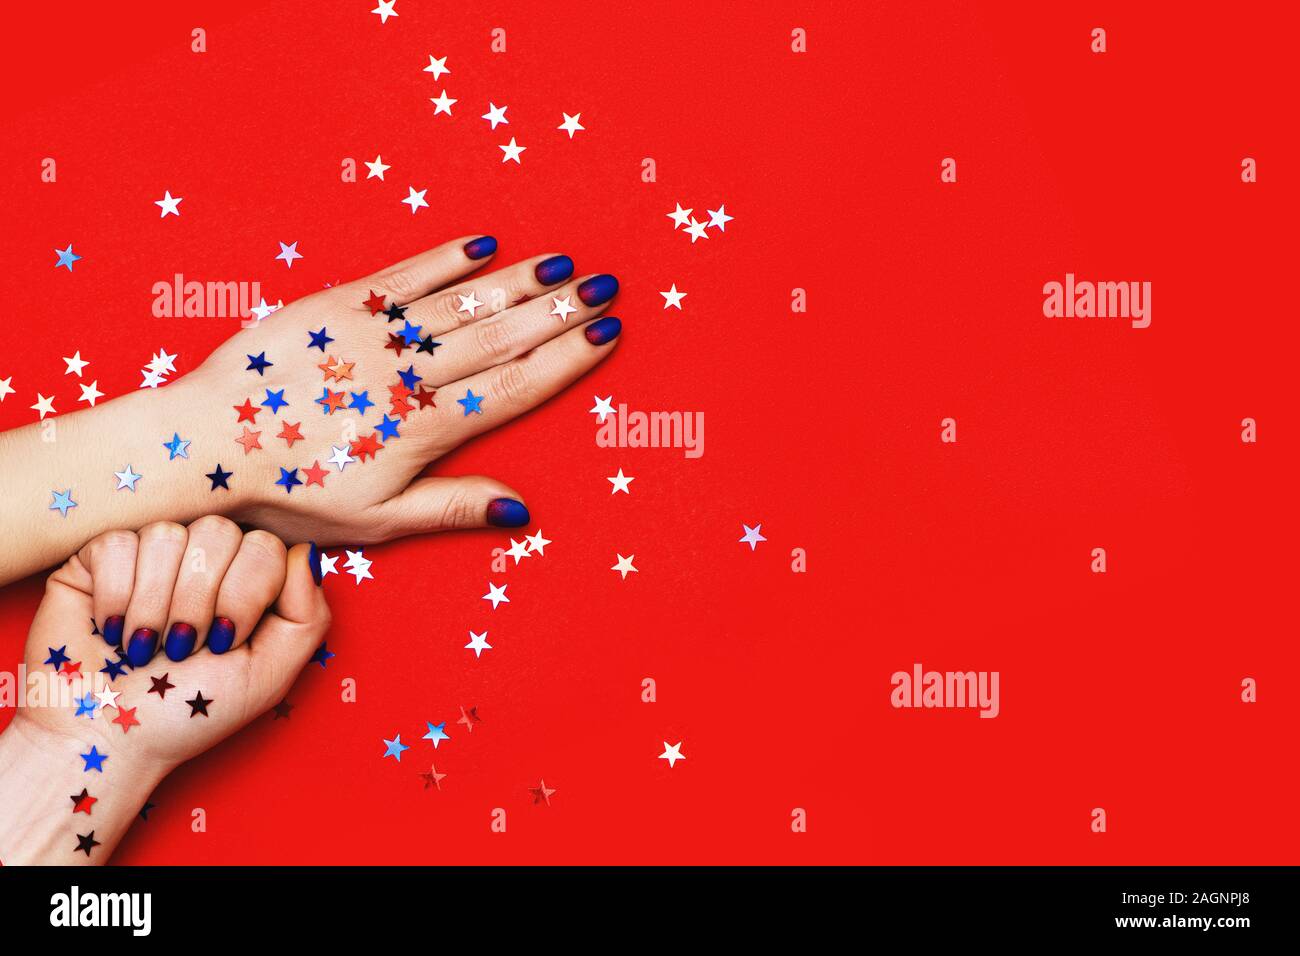 Woman hands with blue manicure on red background with multicolor stars sprinkles. Holiday, party and Christmas concept. Stock Photo